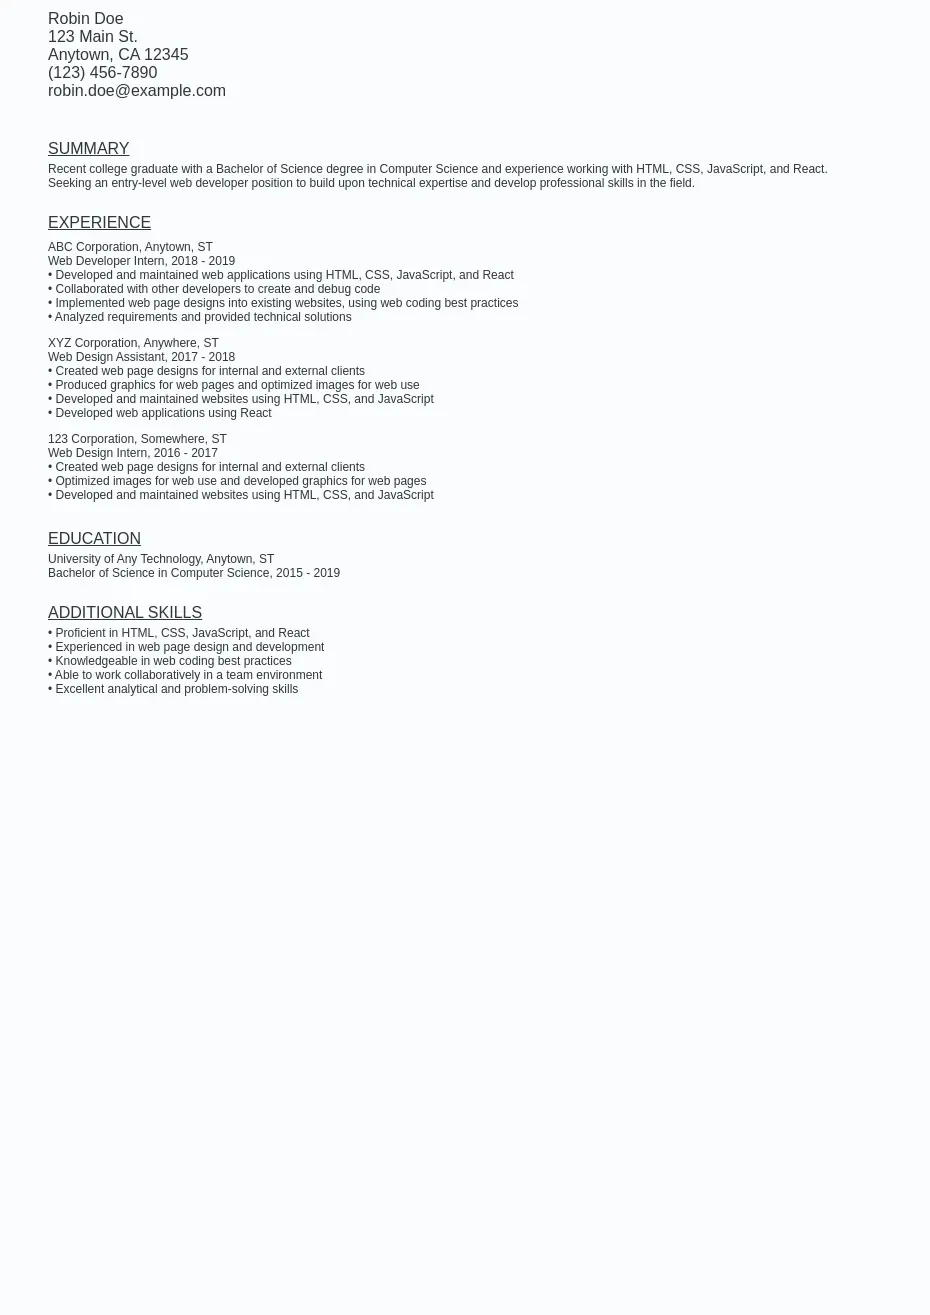 Sample resume template for Remote Entry Level Web Developer, showcasing a clean and professional layout with sections for personal details, experience, education, and skills.